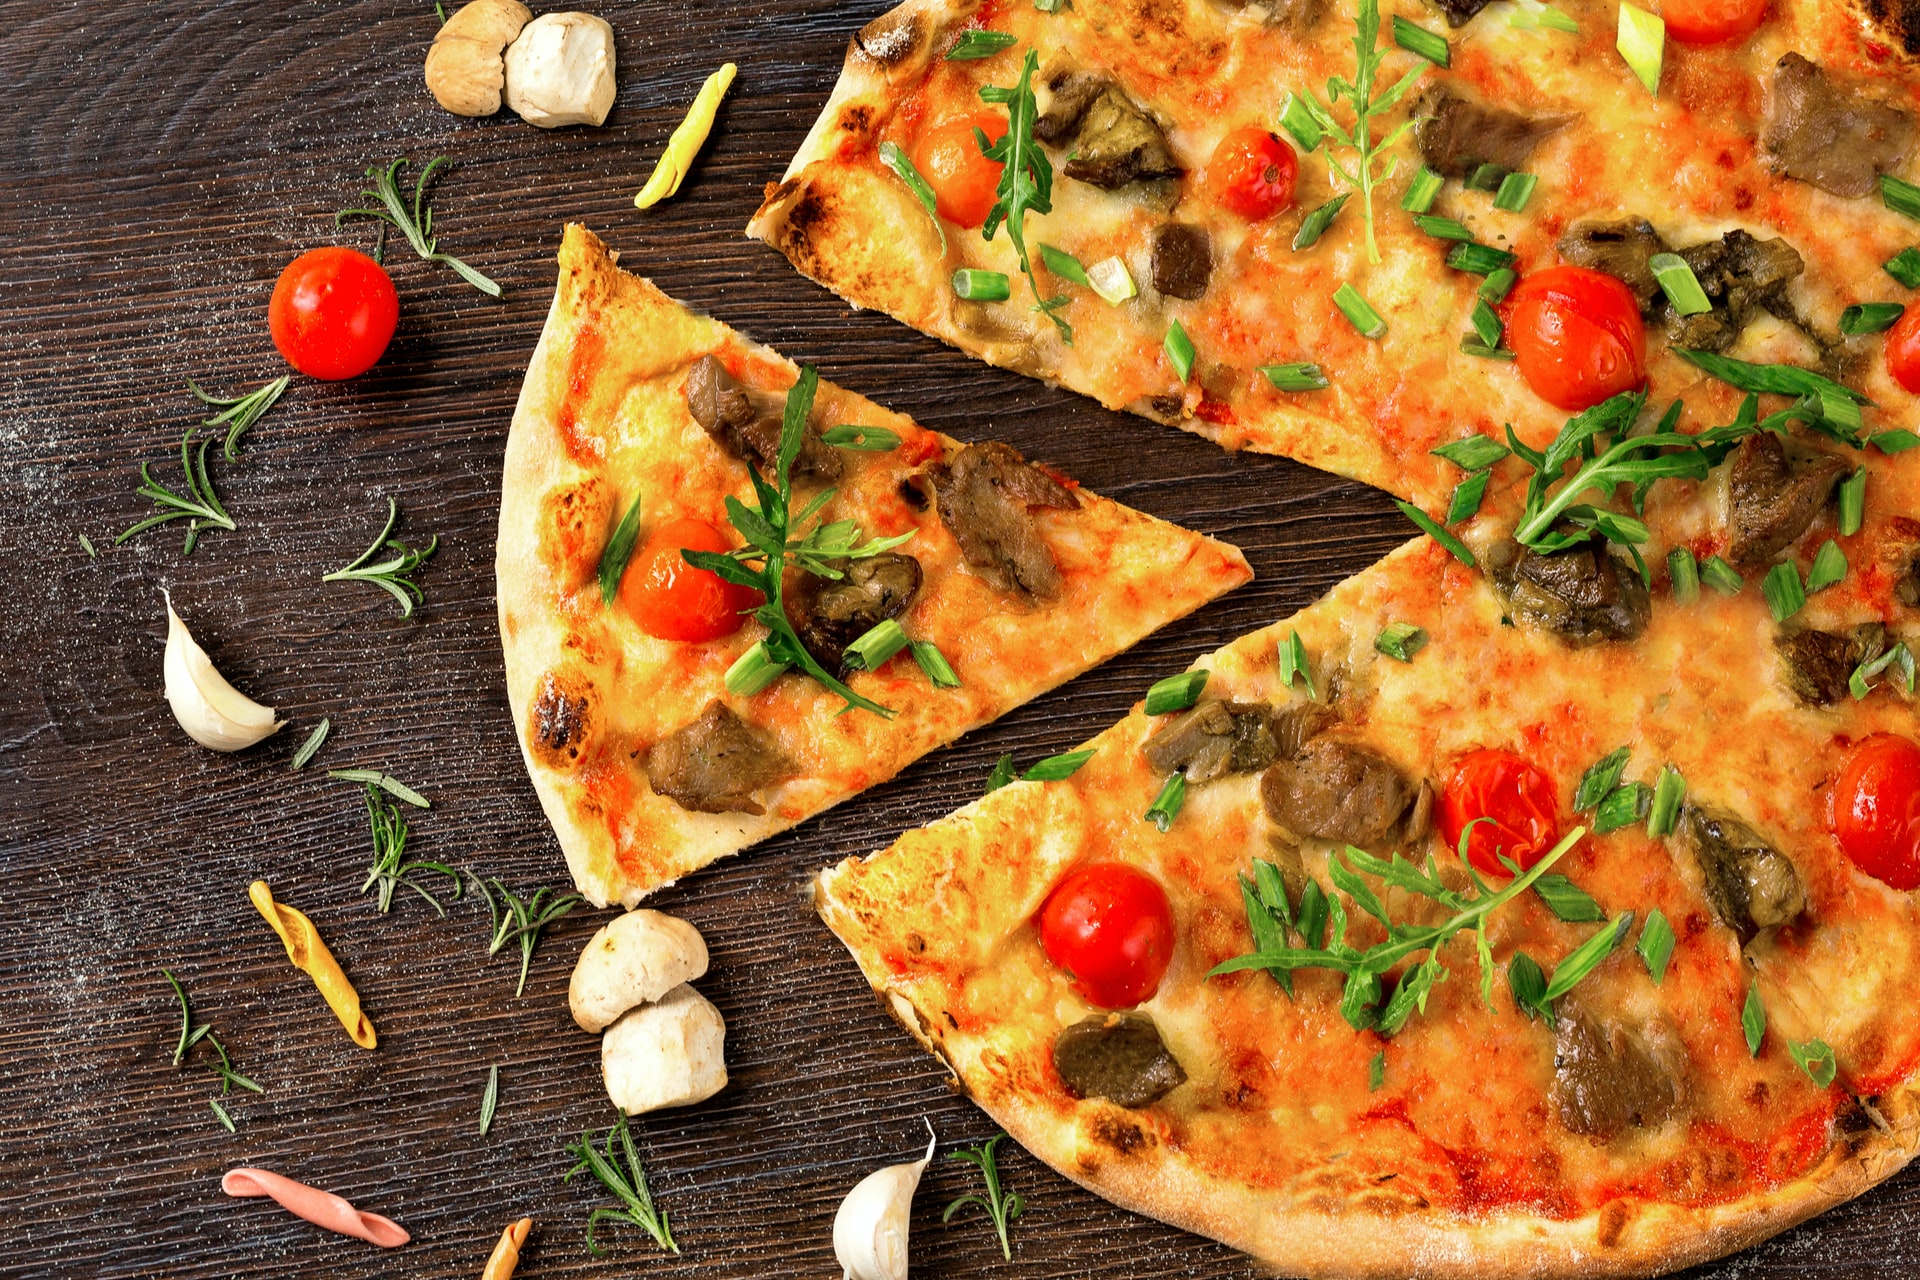 Pizza stone – how to use it?